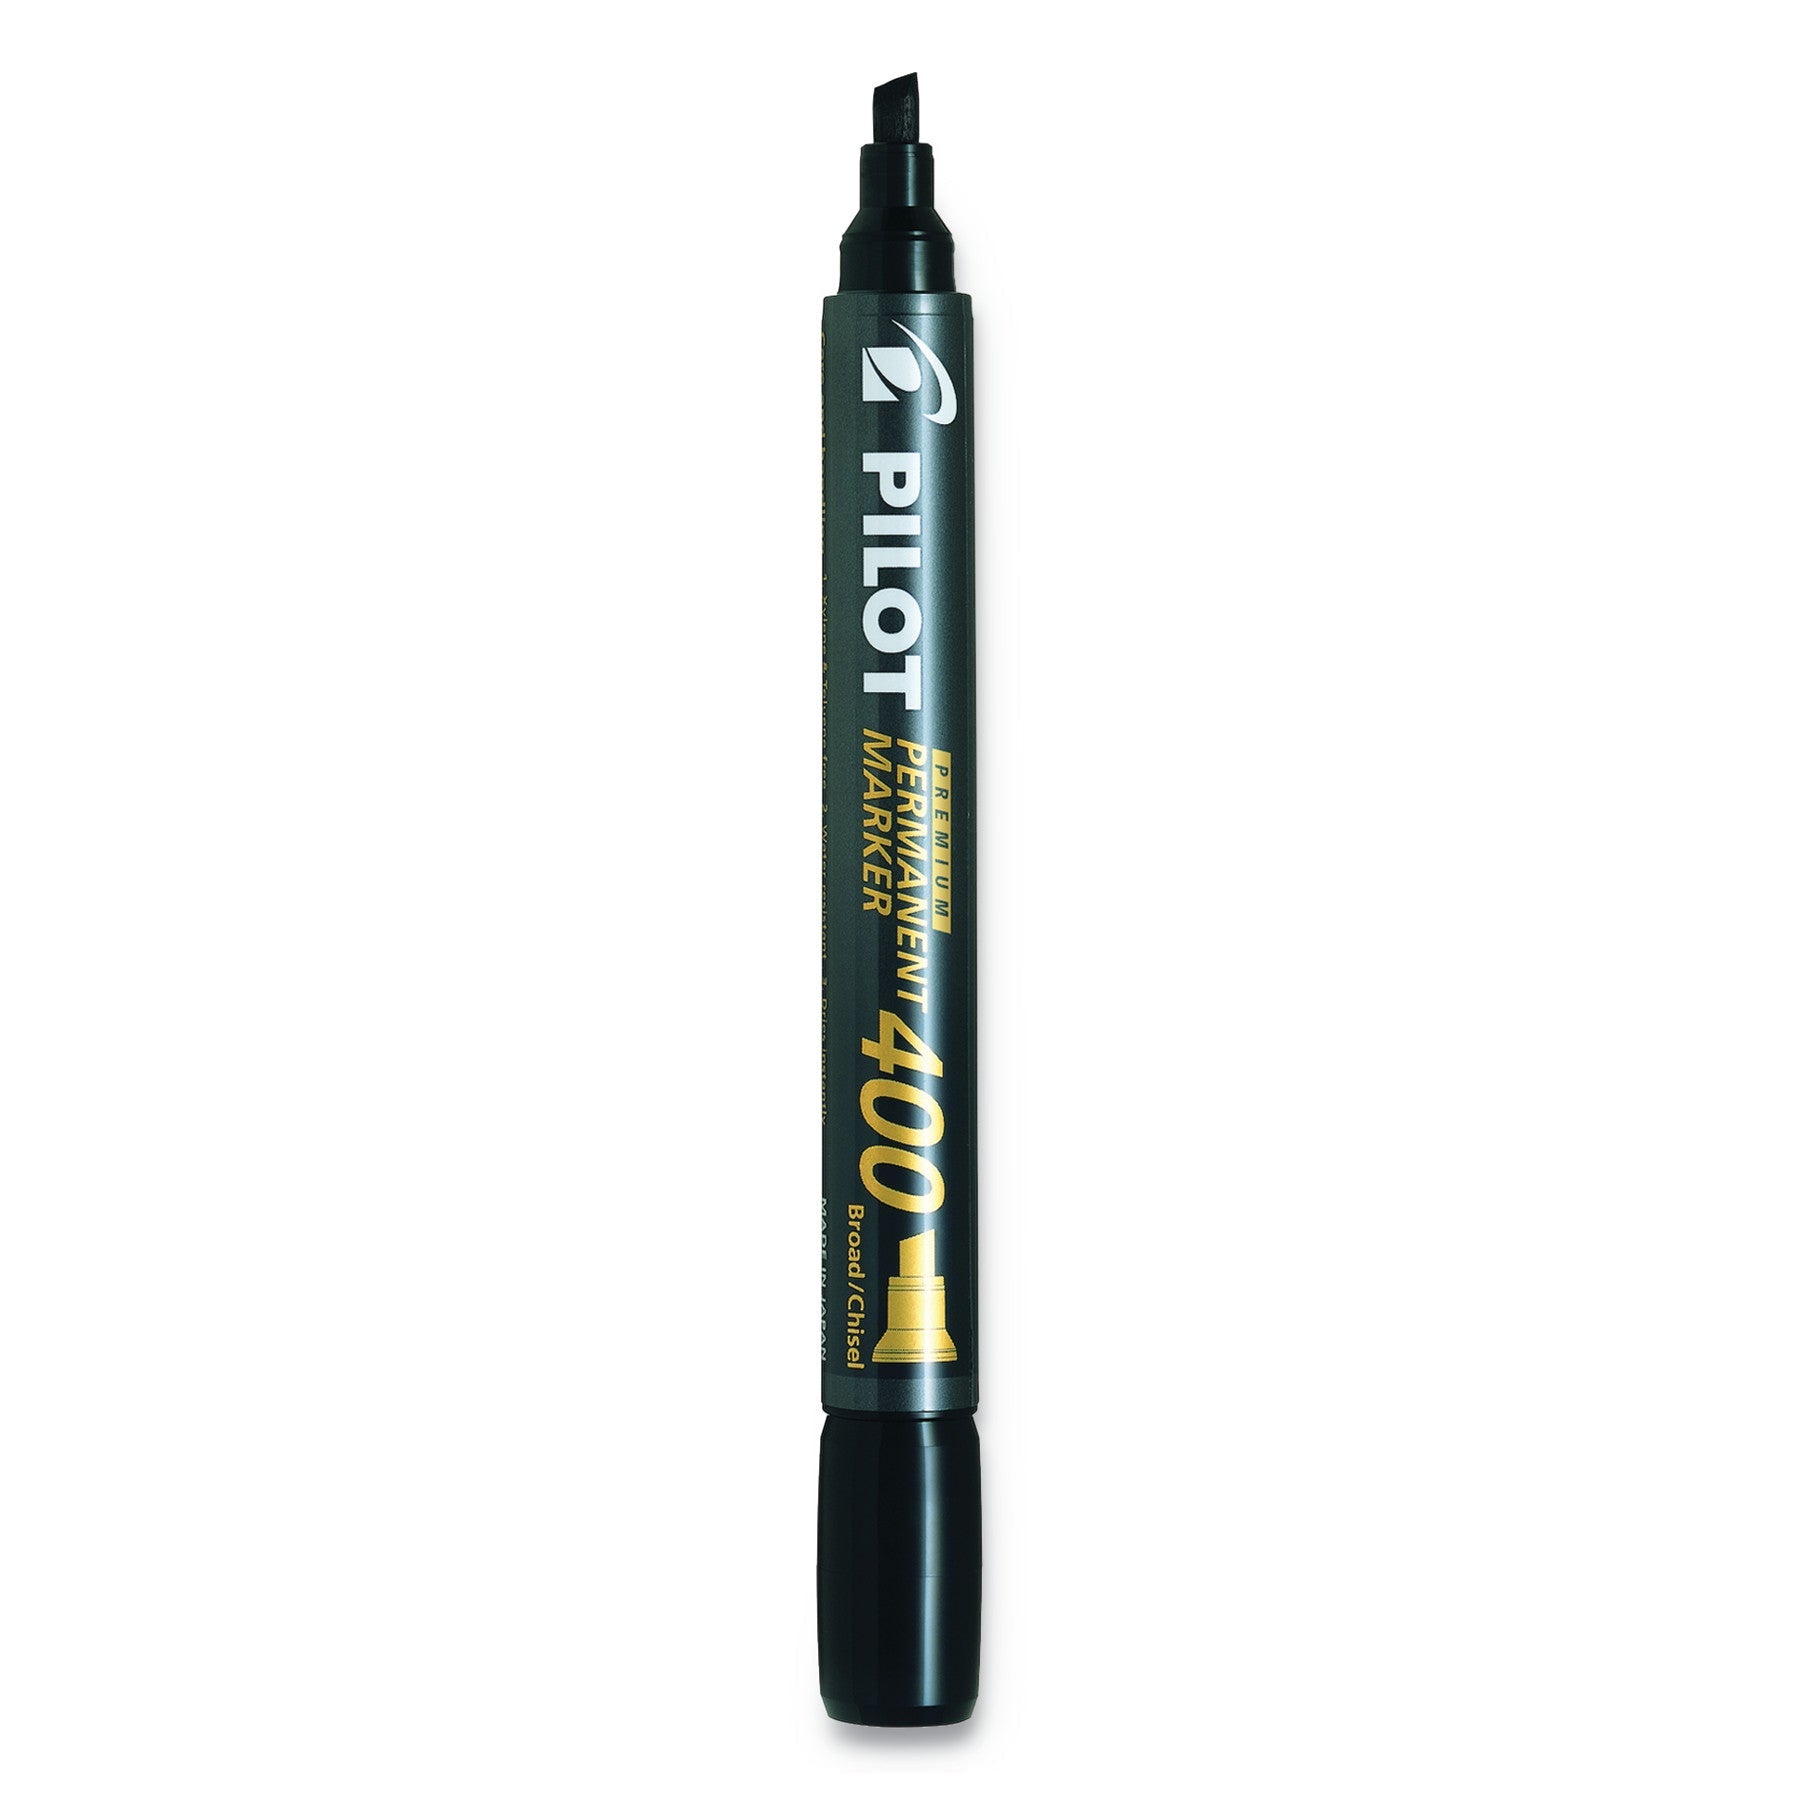 Sharpie, Permanent Markers, Broad Chisel Tip, Black, Pack of 2